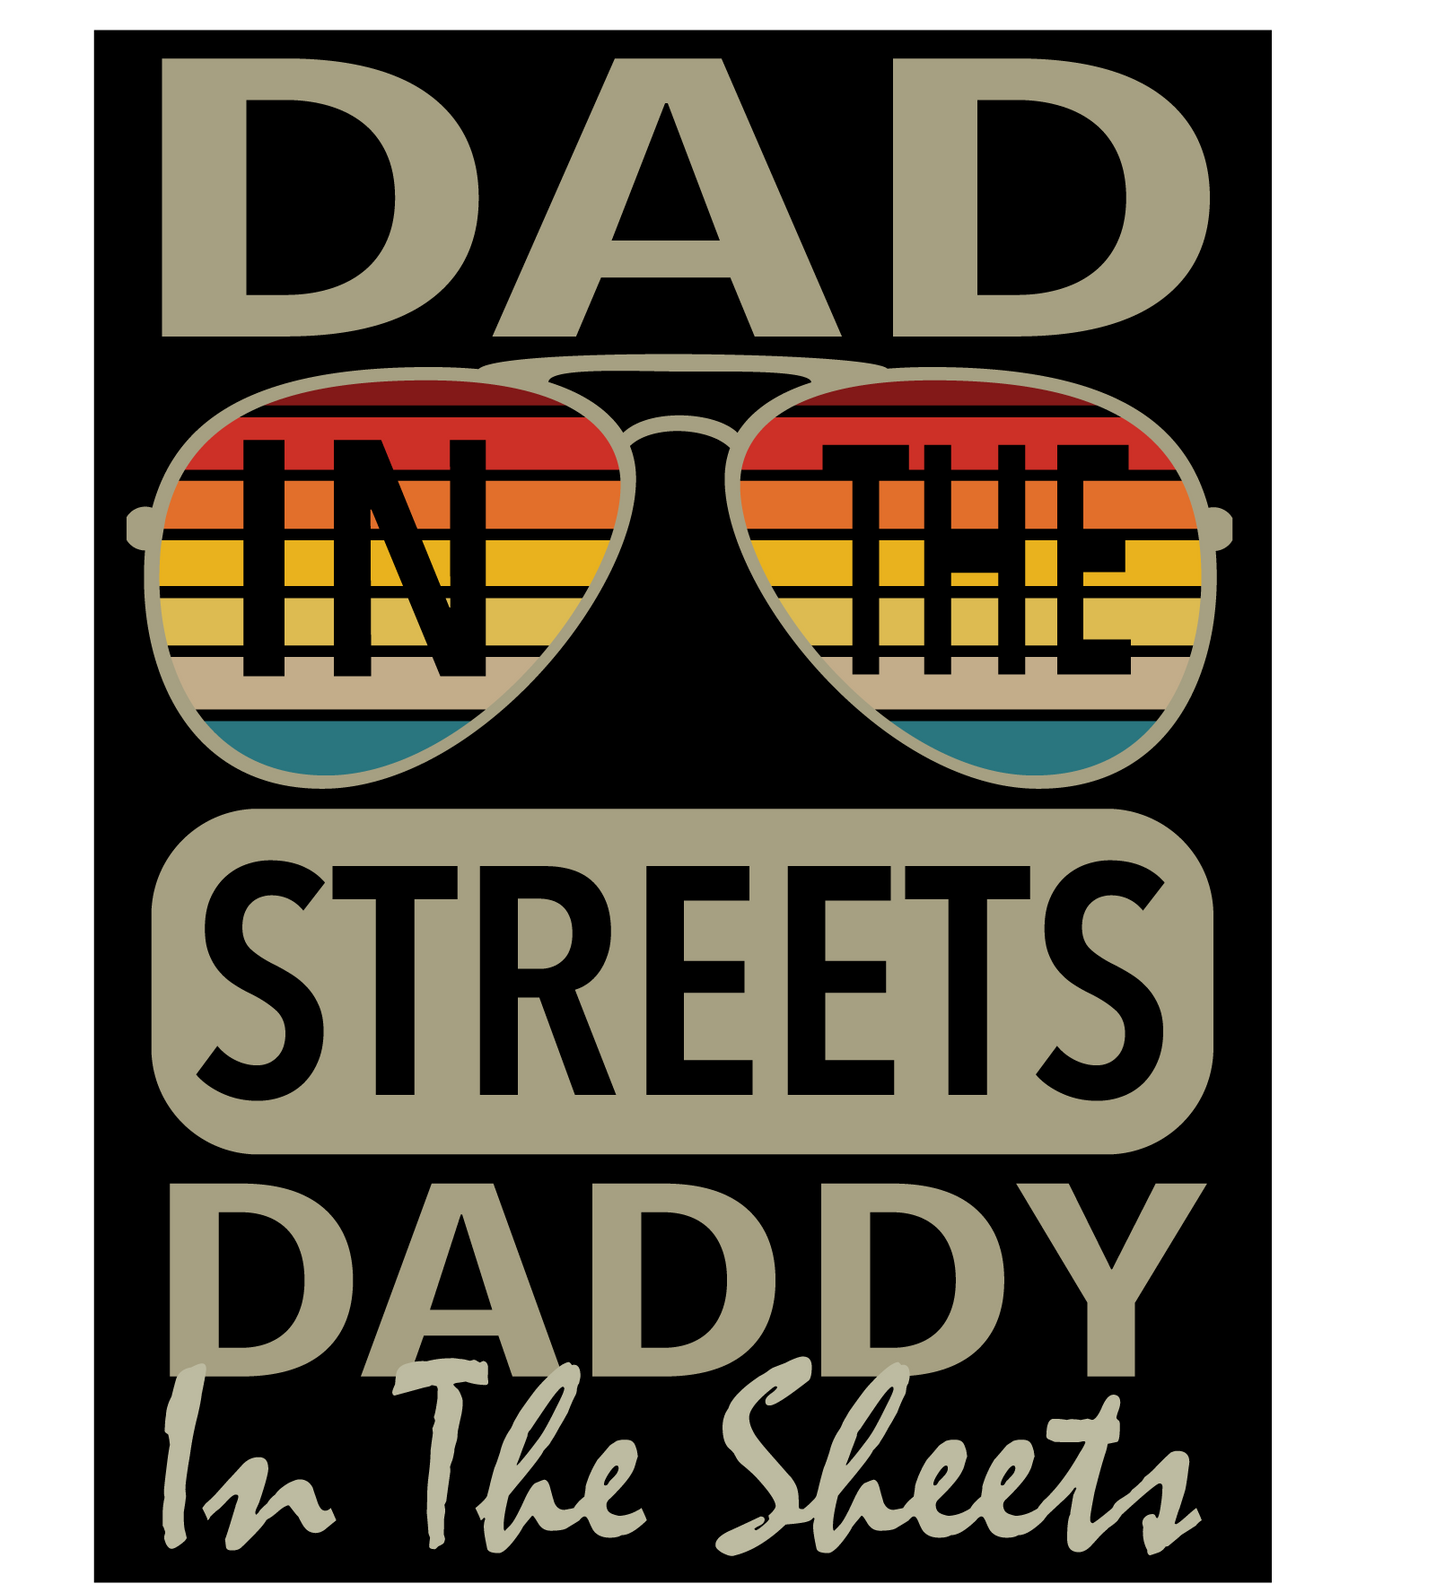 Daddy in the Sheets - Retro Sunglasses! (Sticker/Decal)